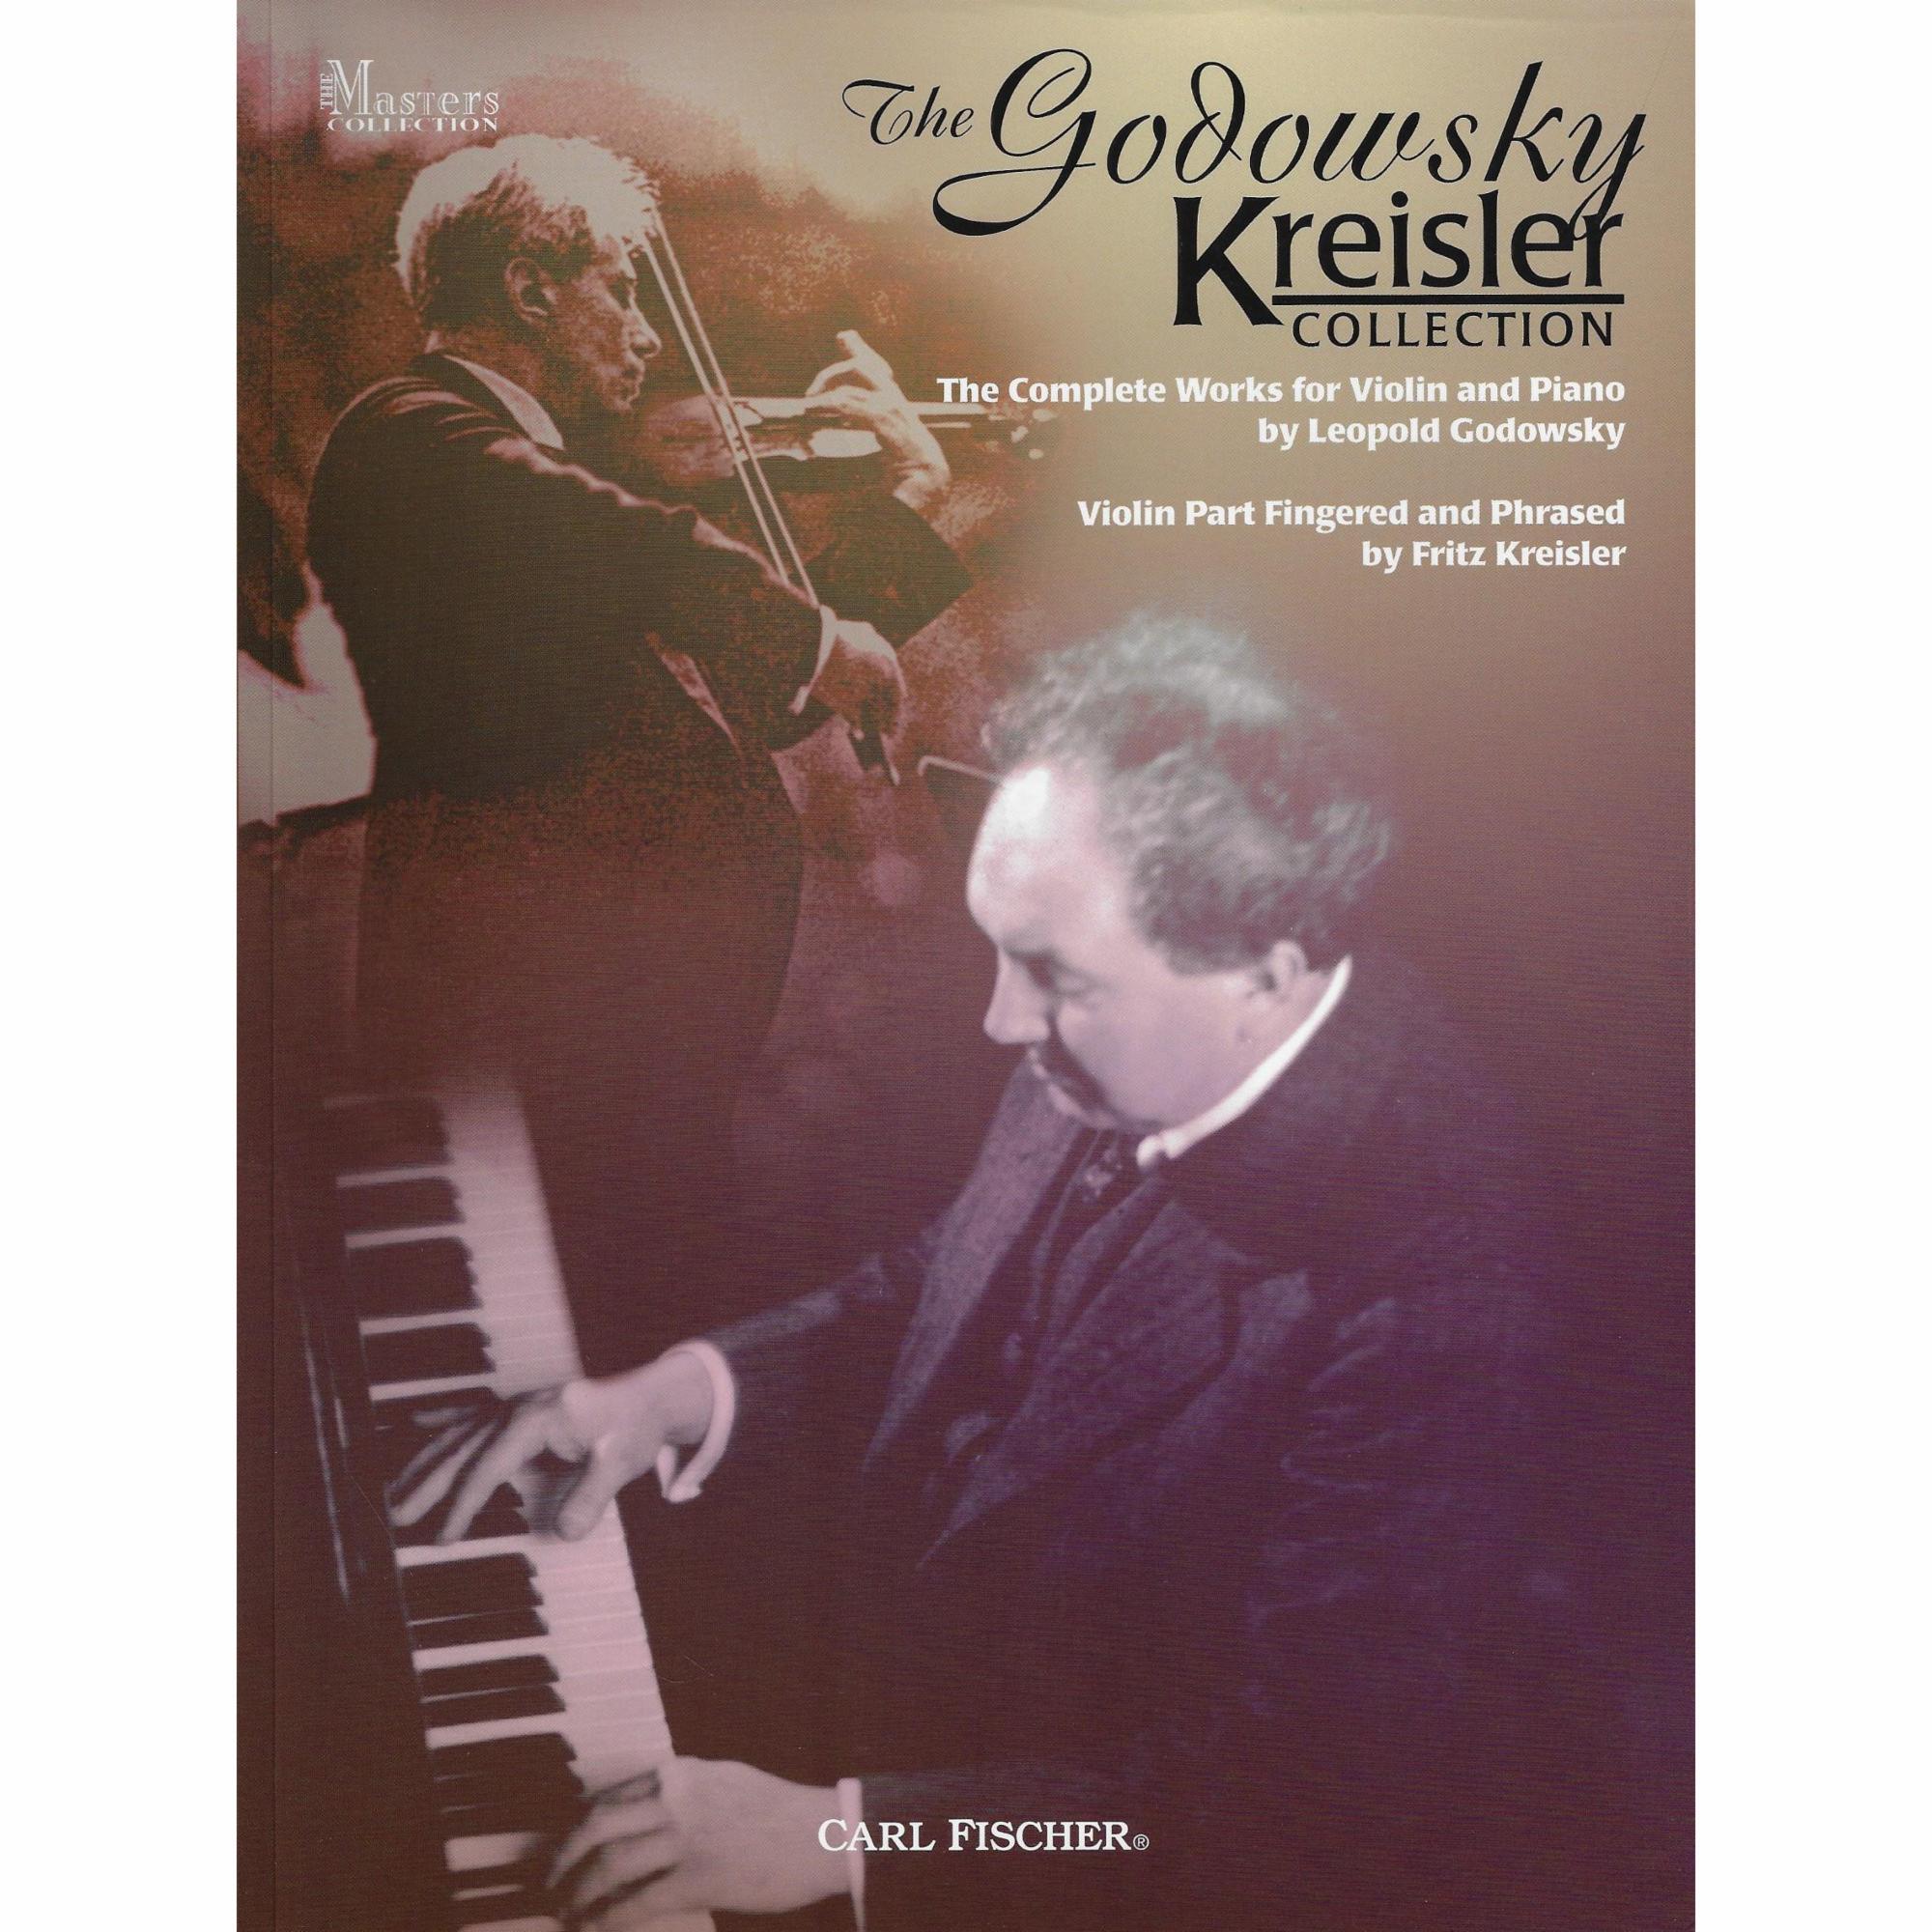 The Godowsky-Kreisler Collection for Violin and Piano